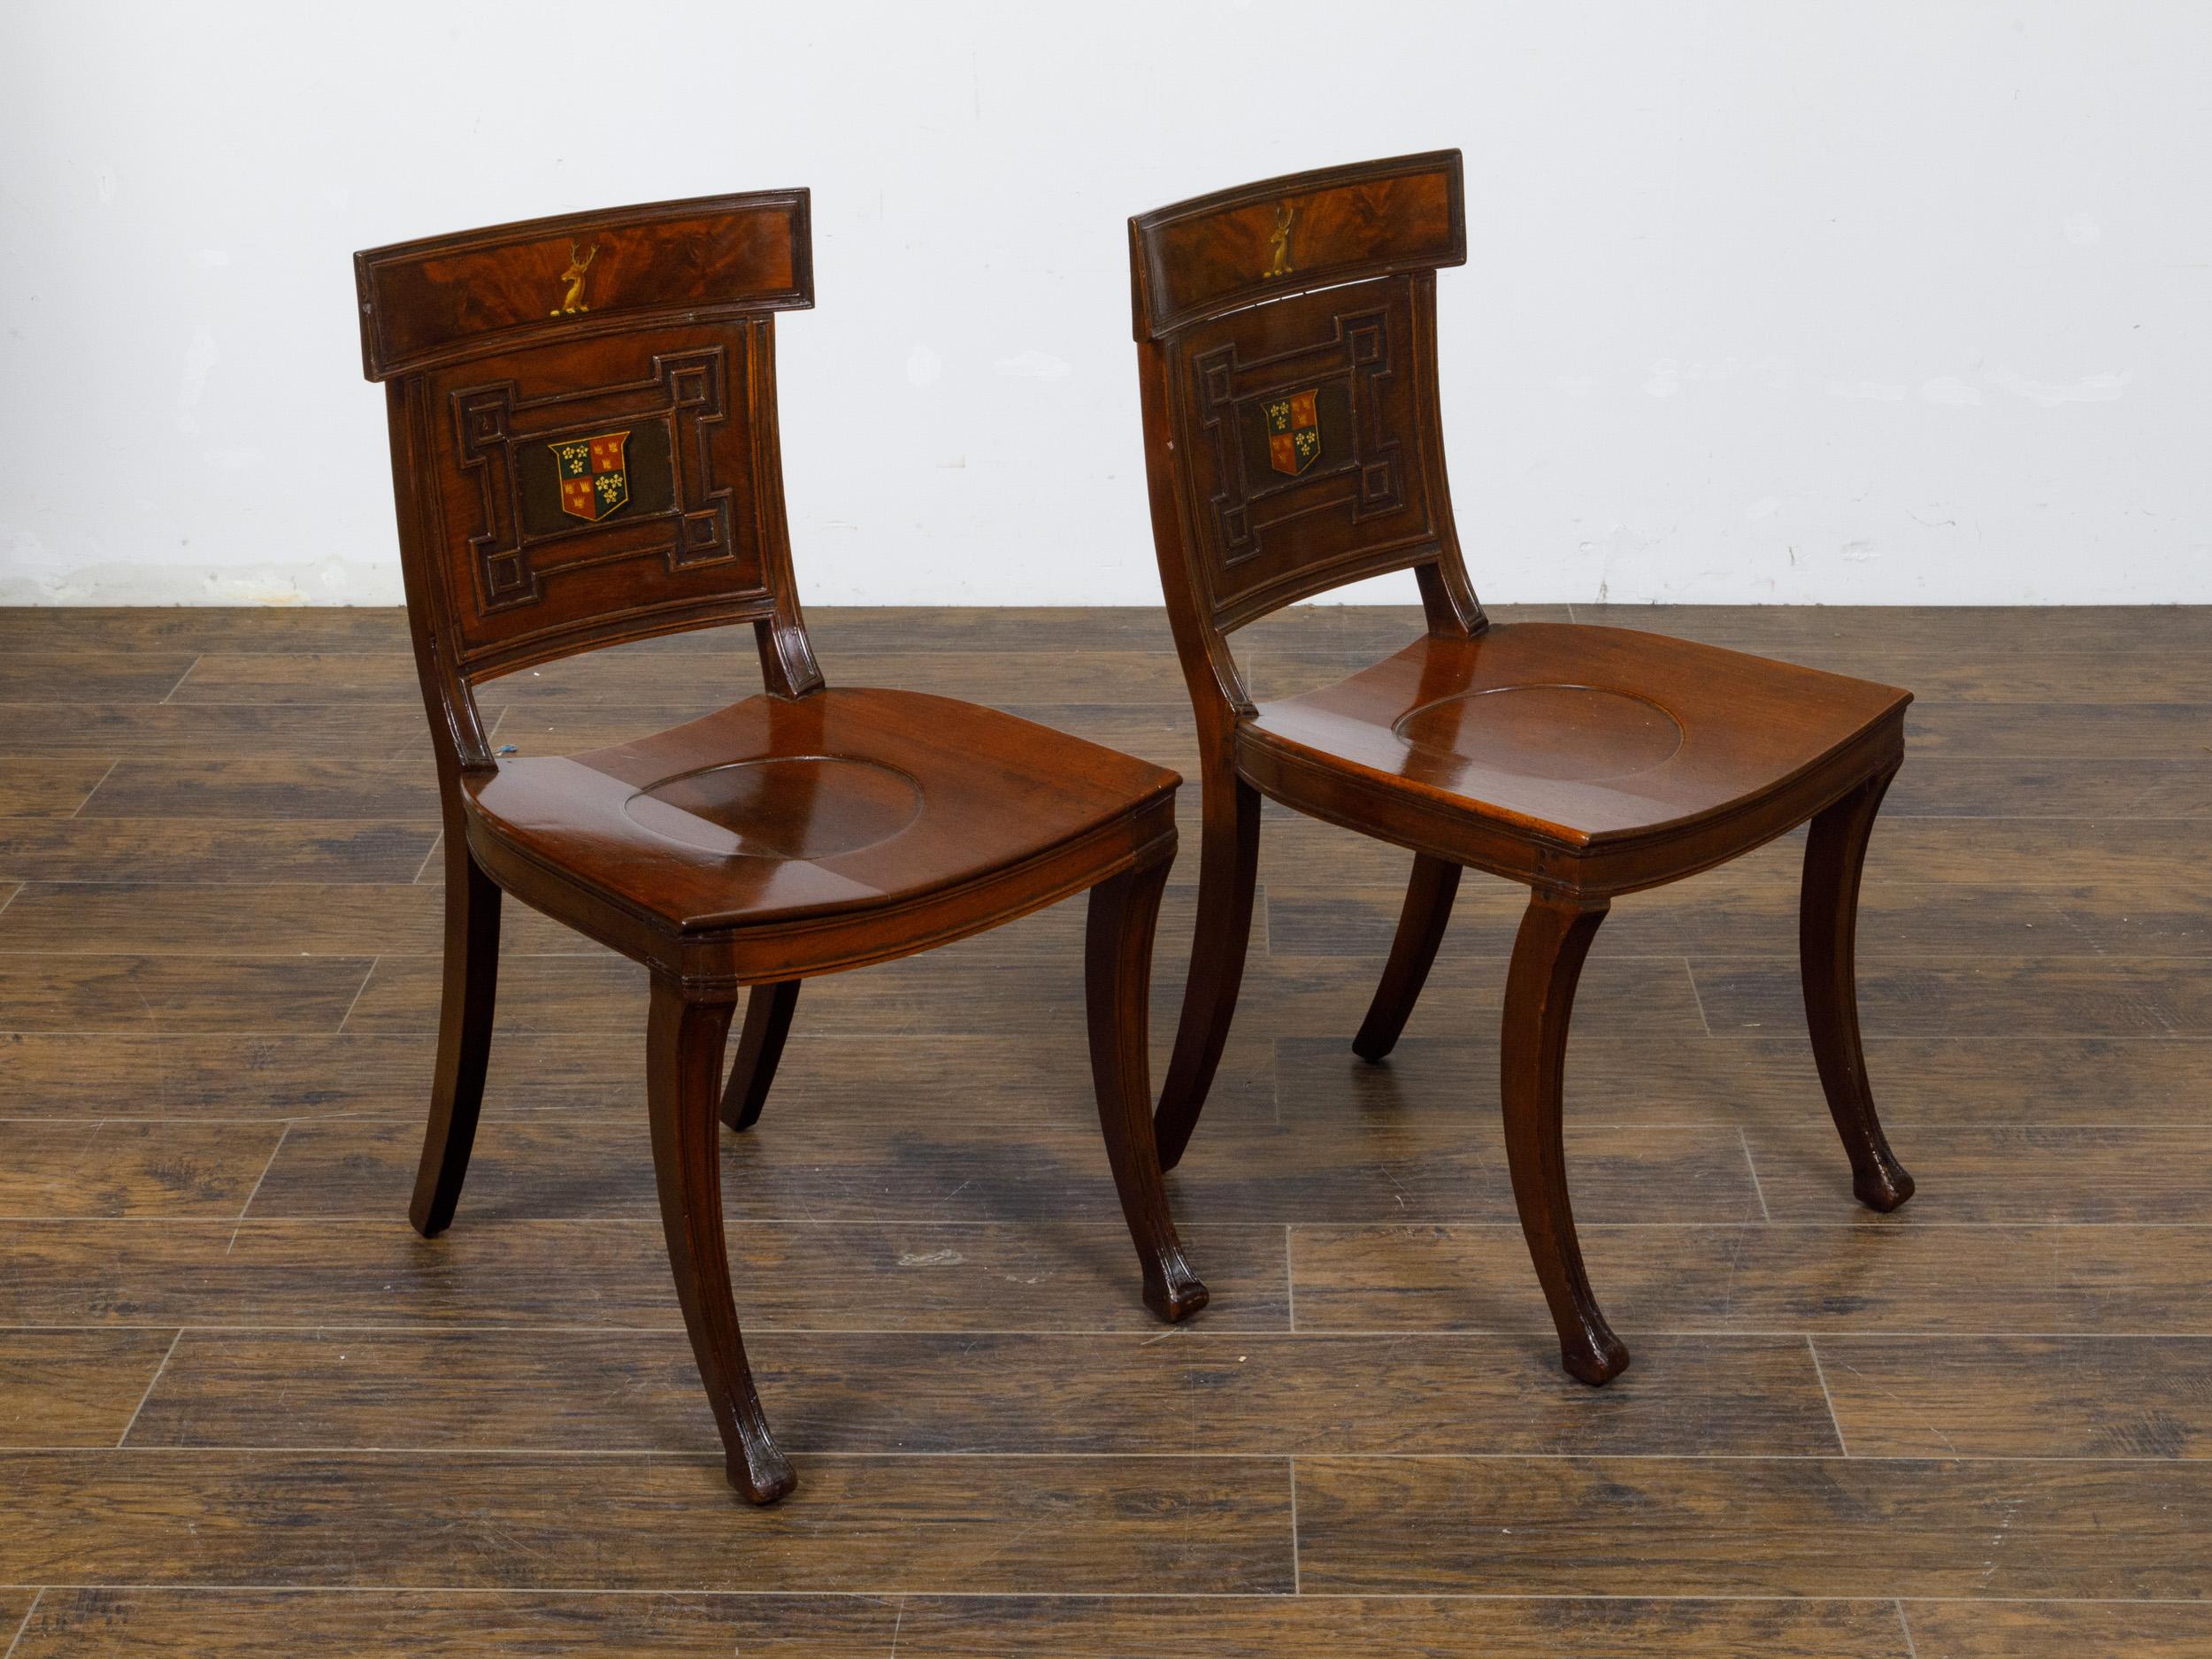 Pair of English Regency Mahogany Hall Chairs with Painted Coat of Arms For Sale 1